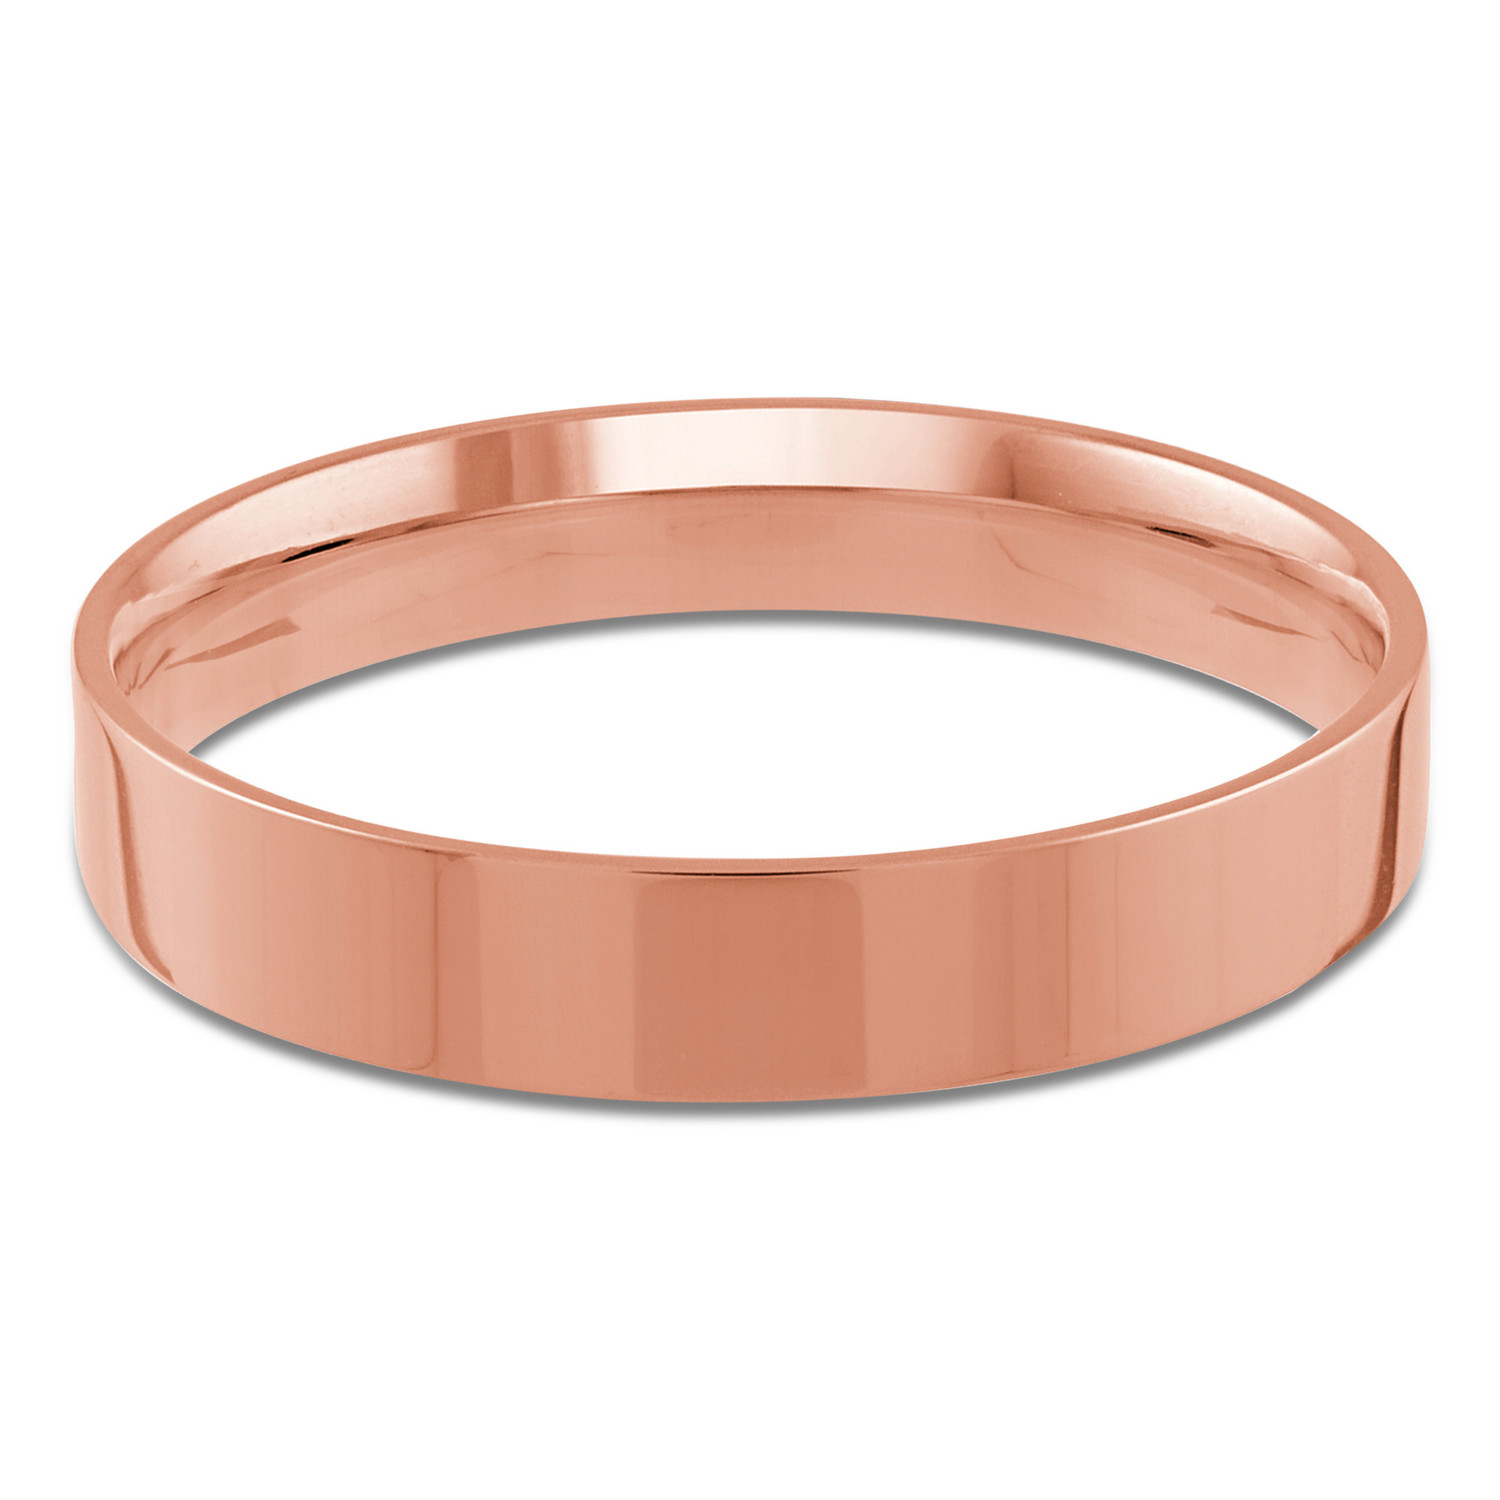 4 MM Classic Womens Wedding Band in Rose Gold (MDVBC0003-4MM-R)